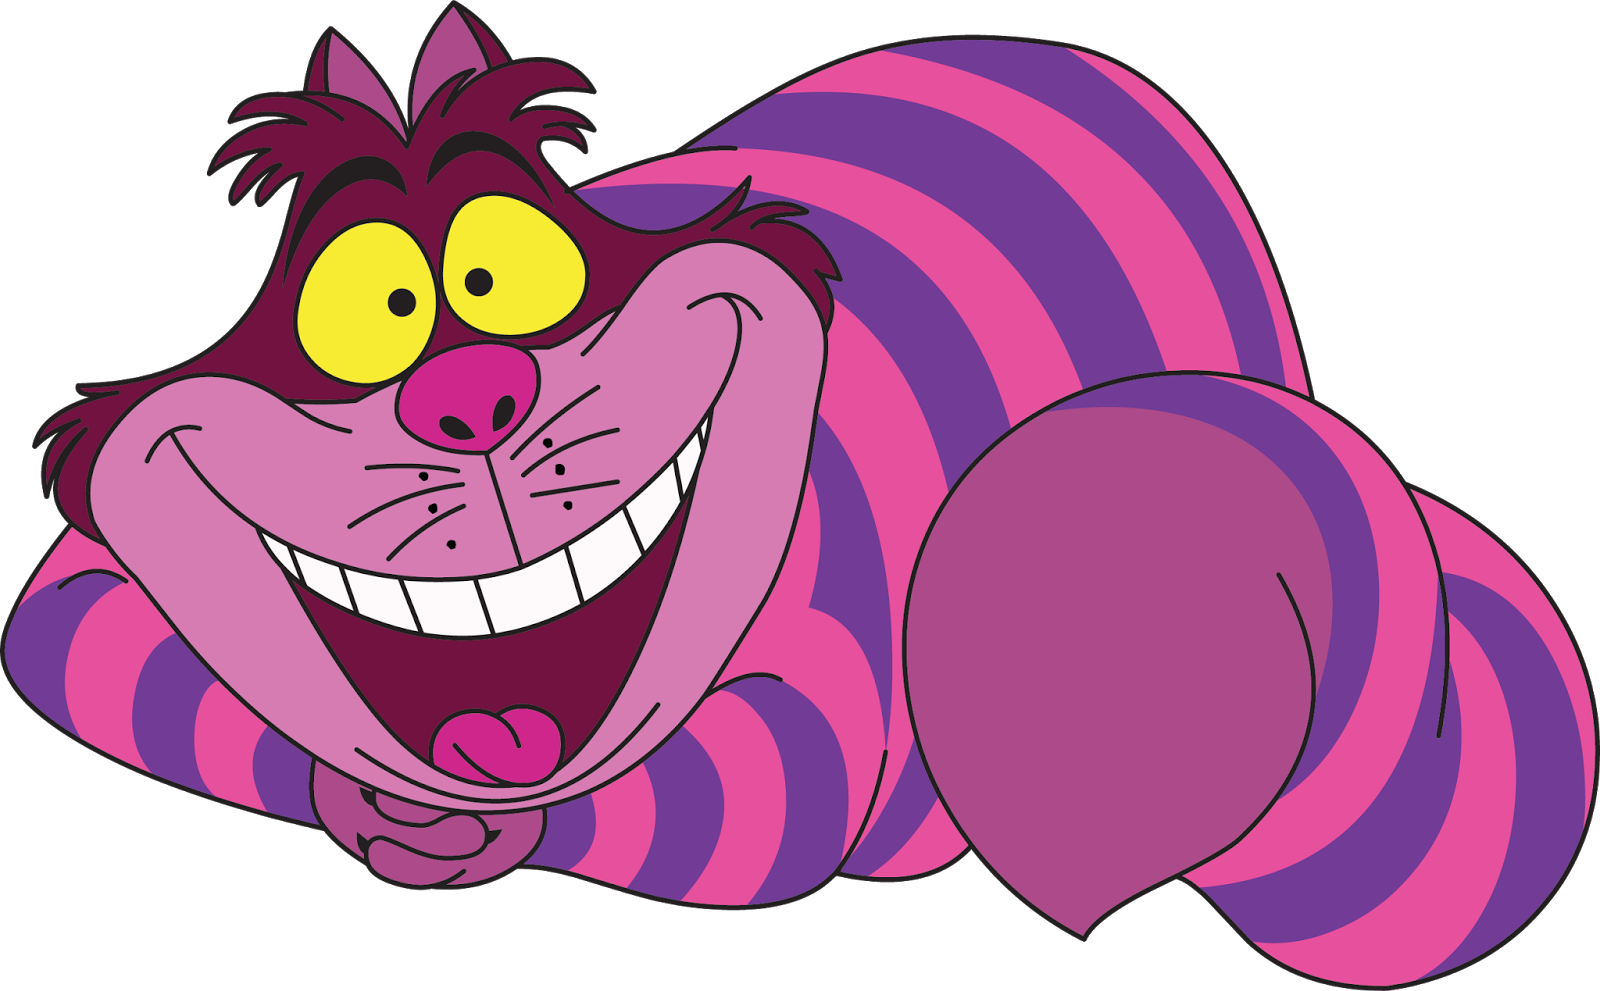 Cheshire Cat Pictures To Copy